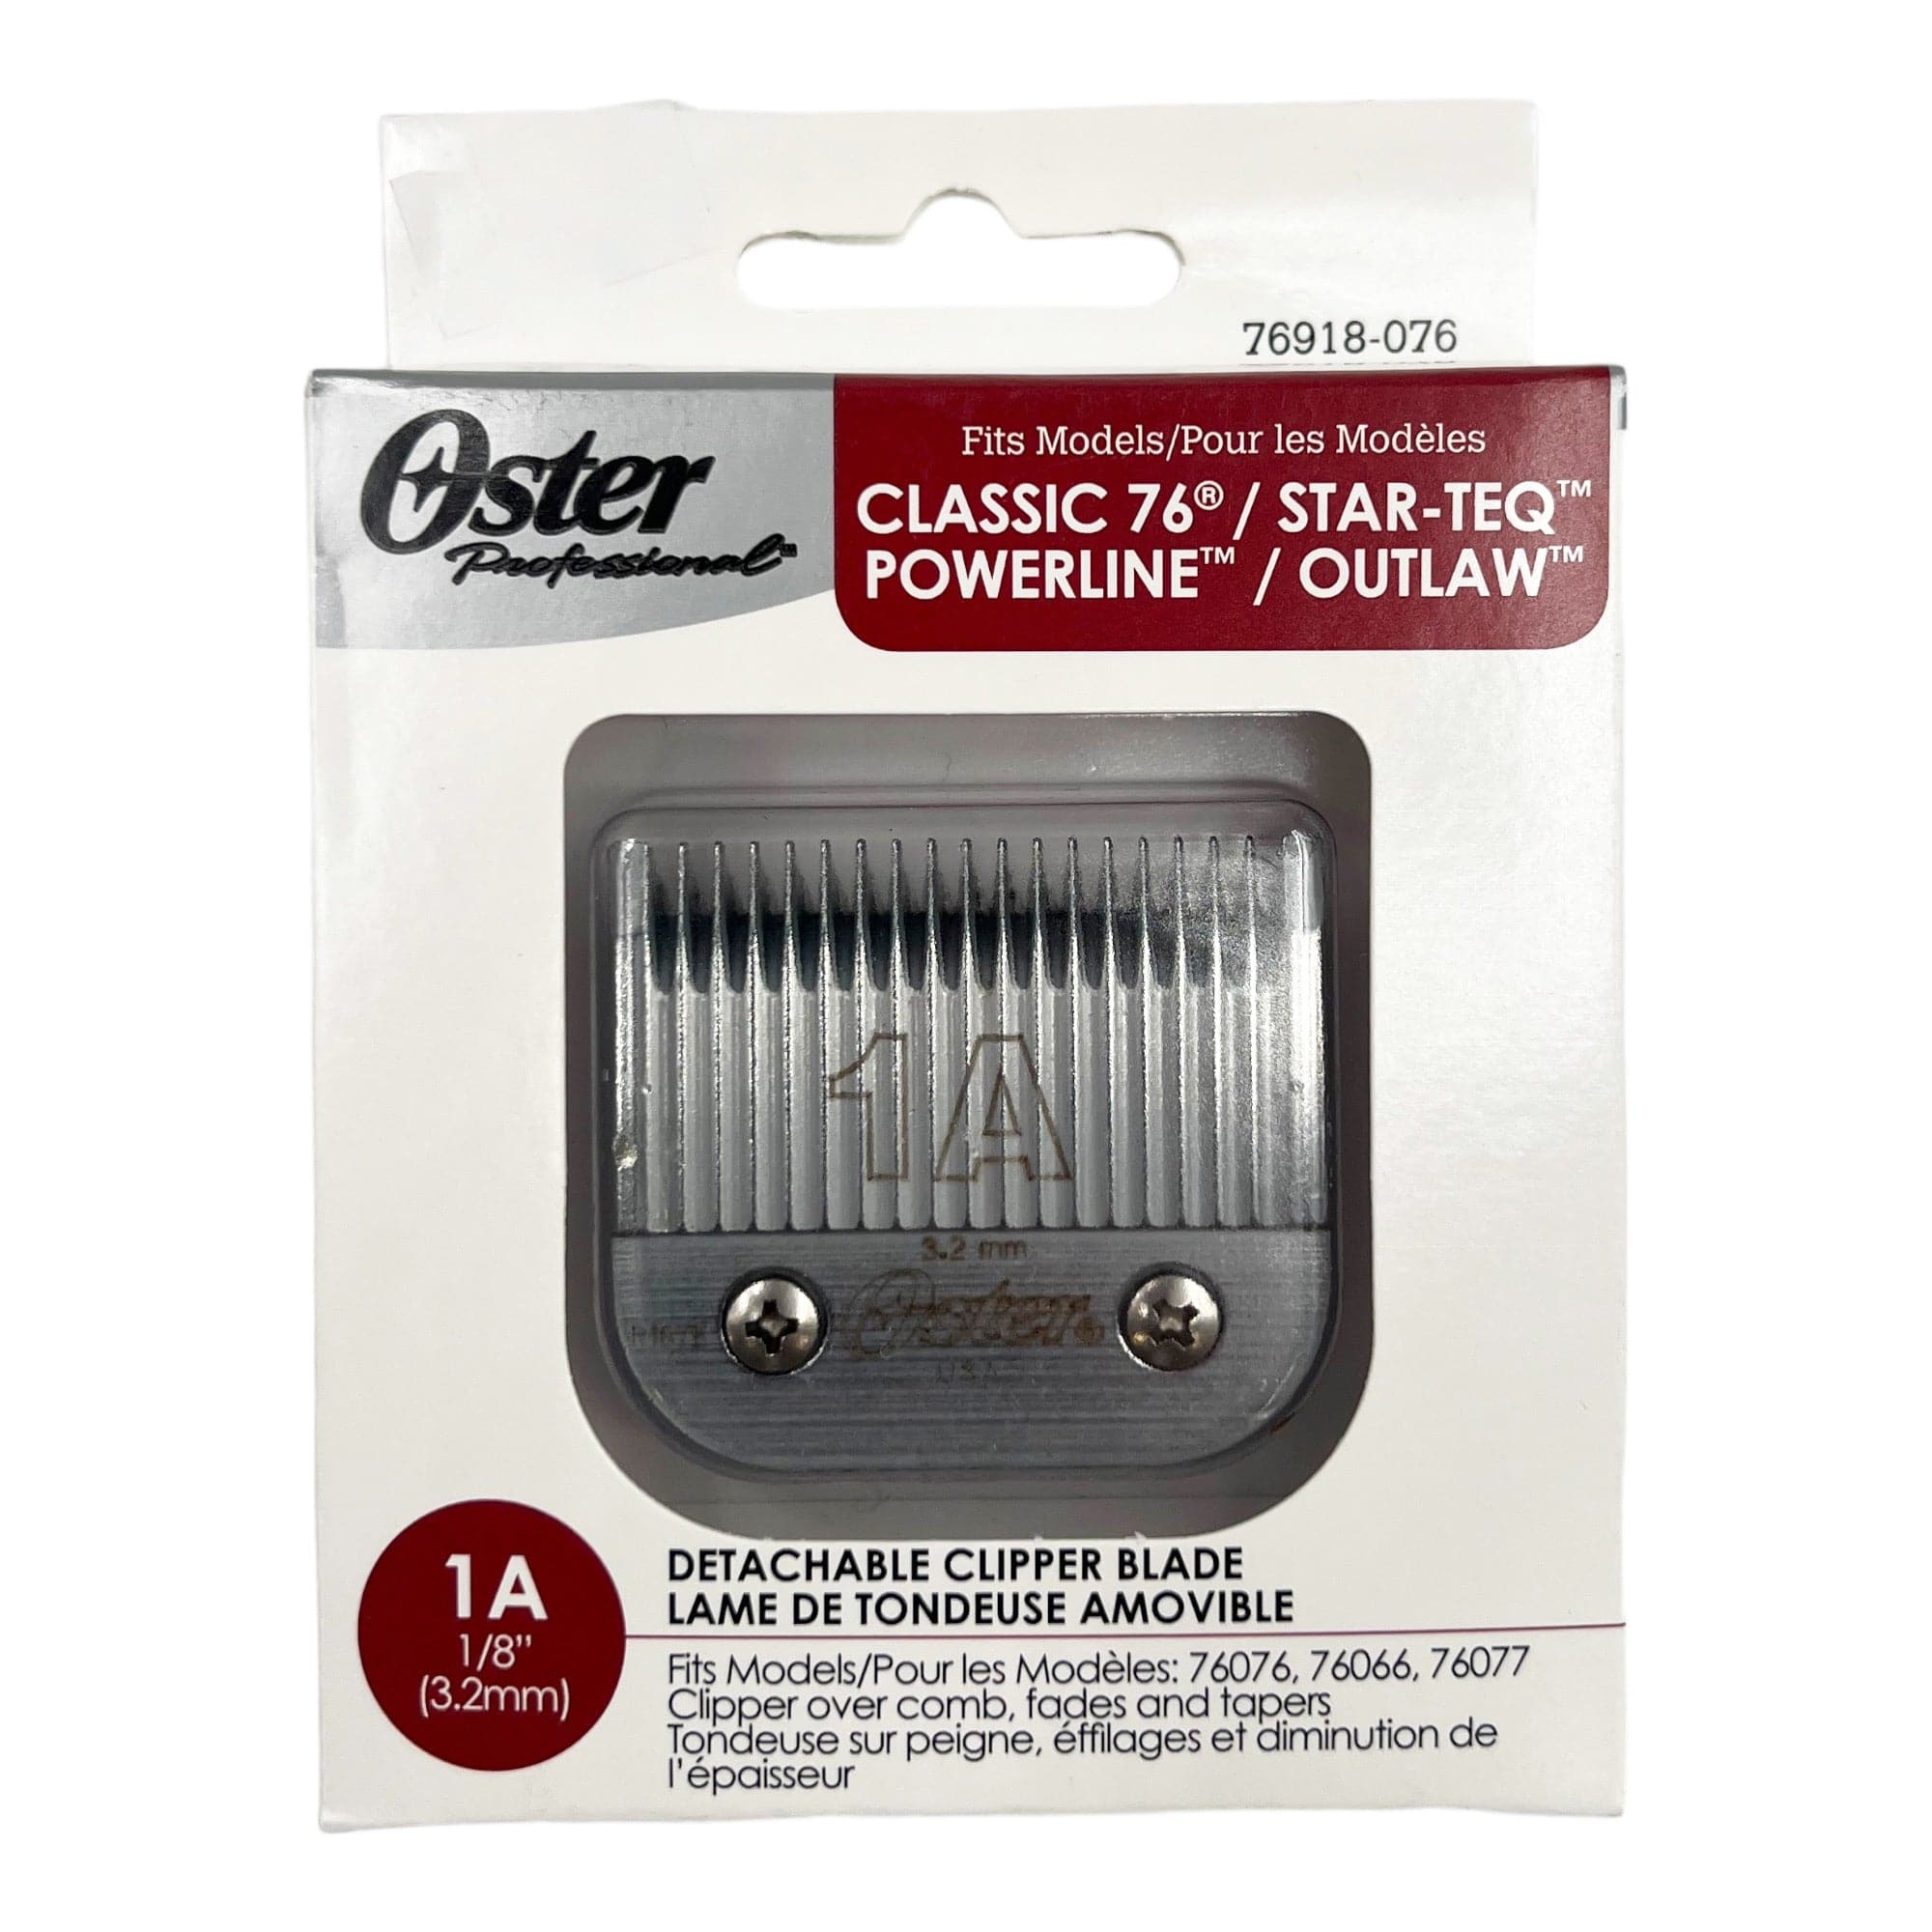 Oster - 076918-076 Detachable Blade Size 1A 3.2mm